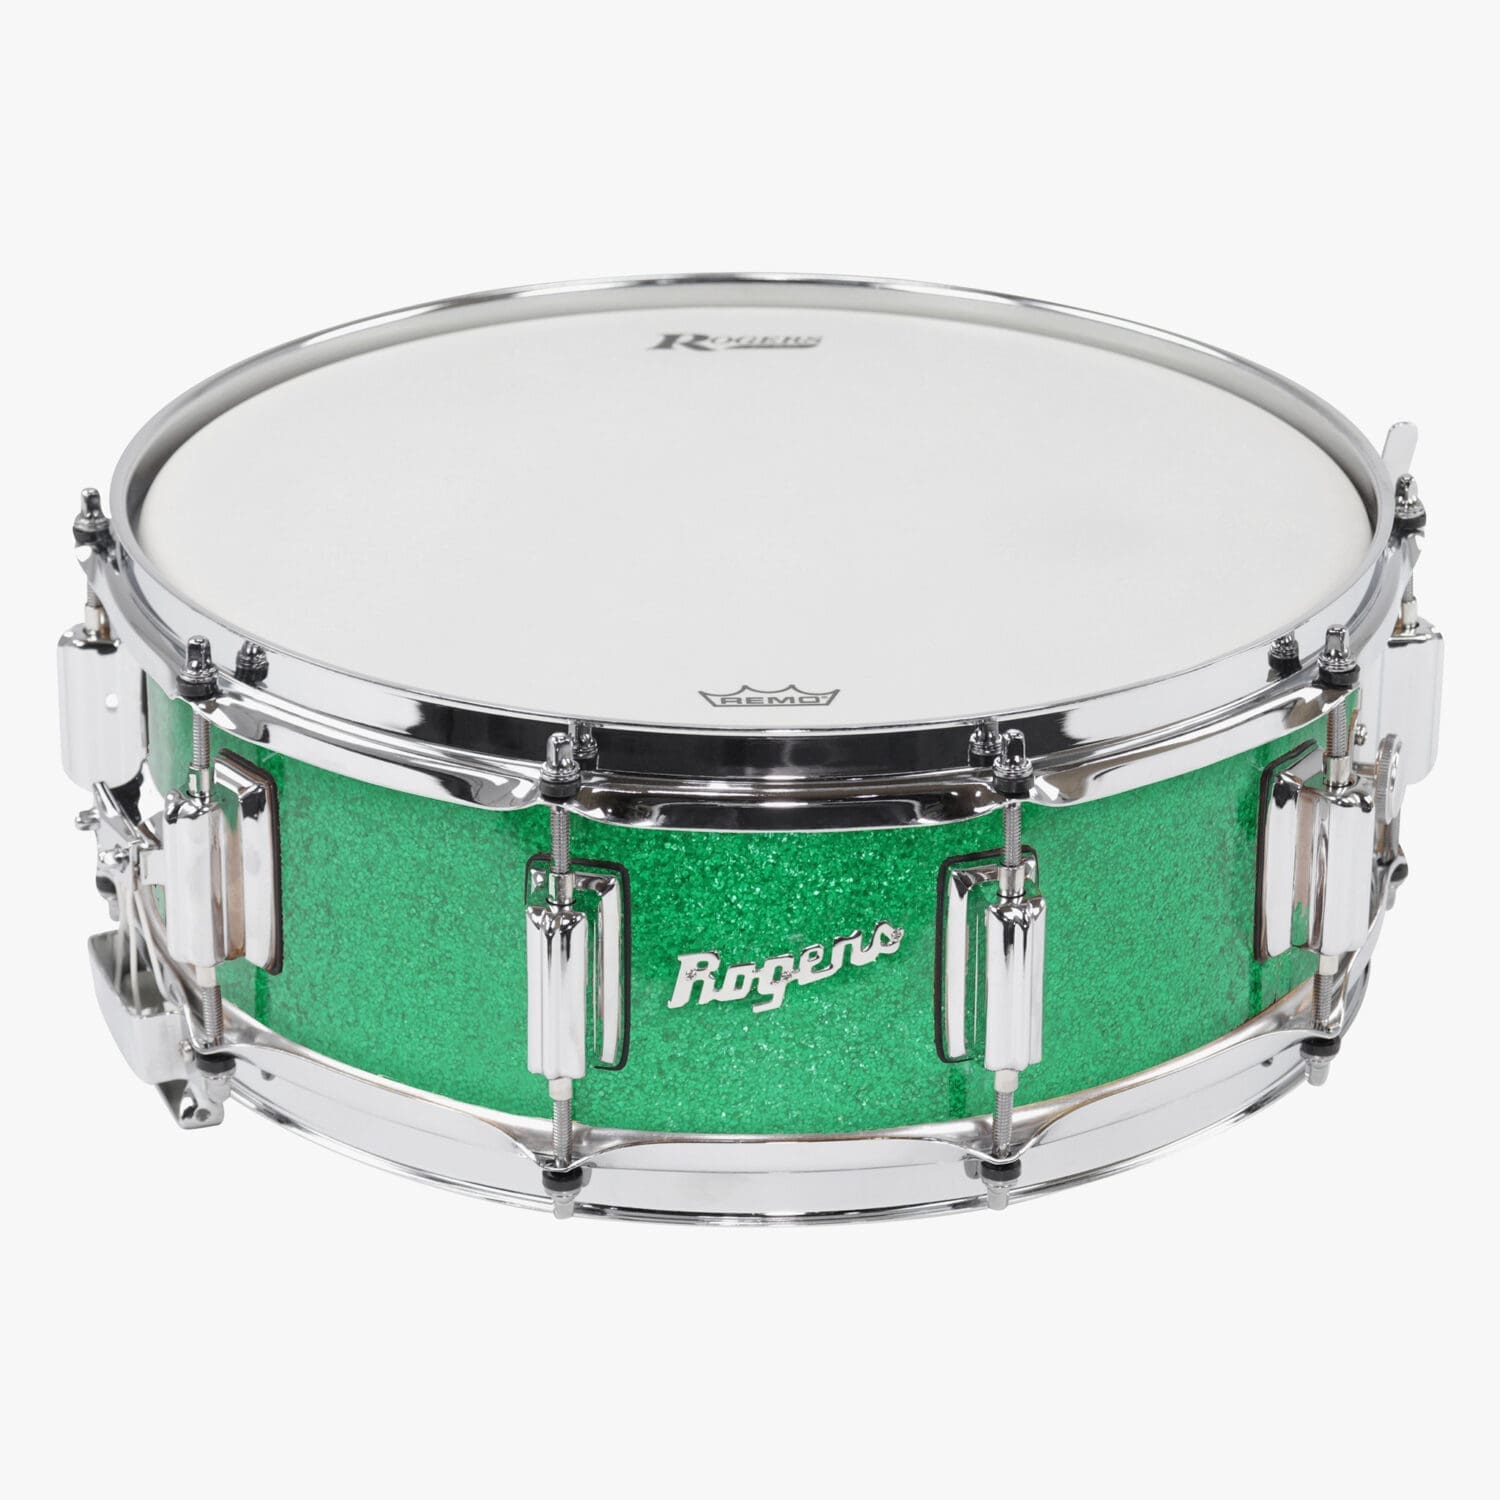 Green Sparkle Wrap Dyna-Sonic Snare Drum